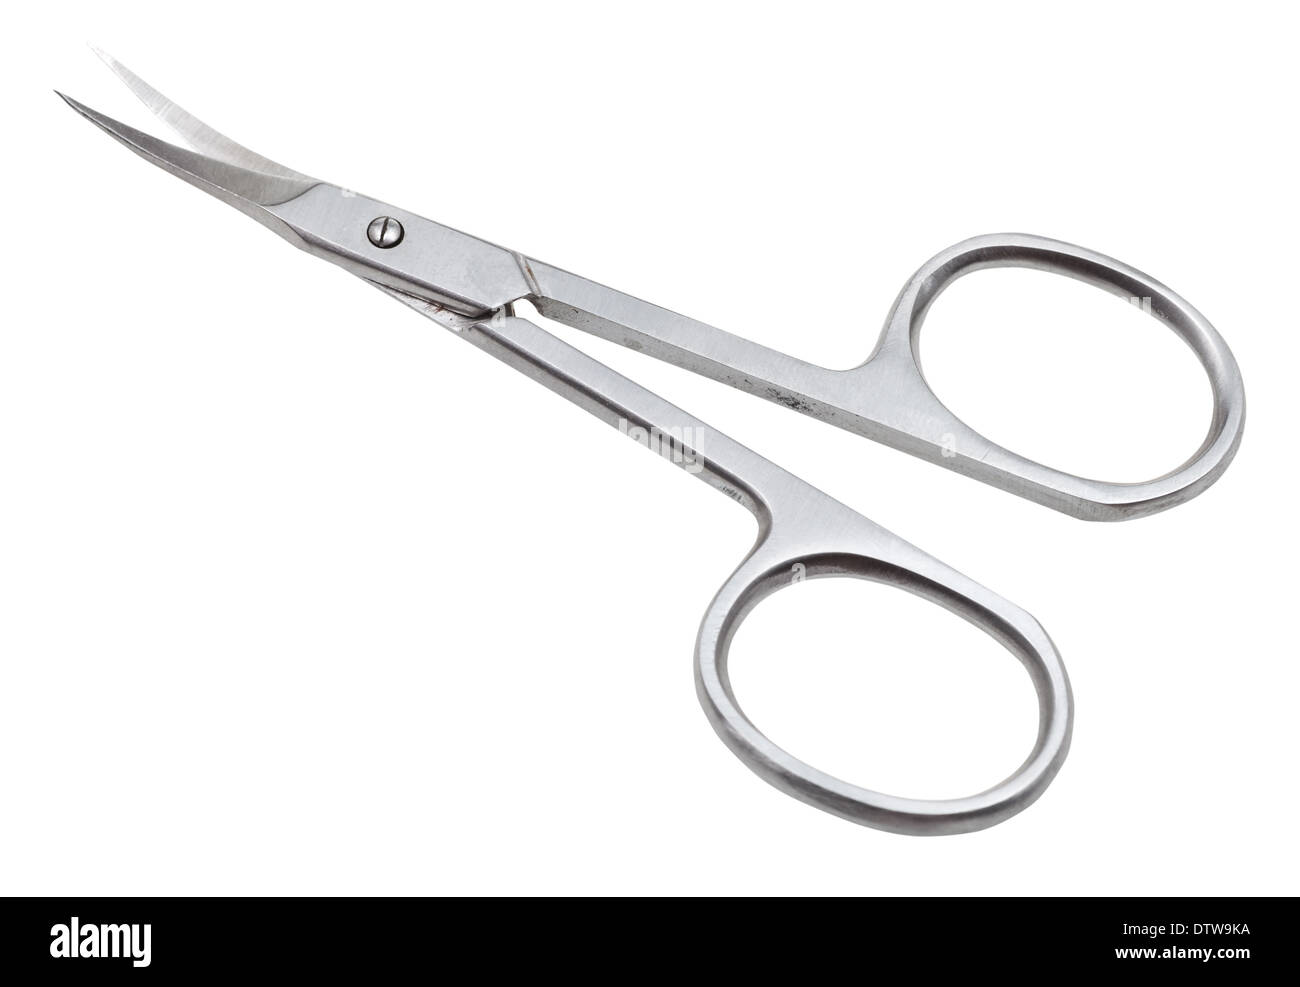 pair of manicure scissors isolated on white background Stock Photo